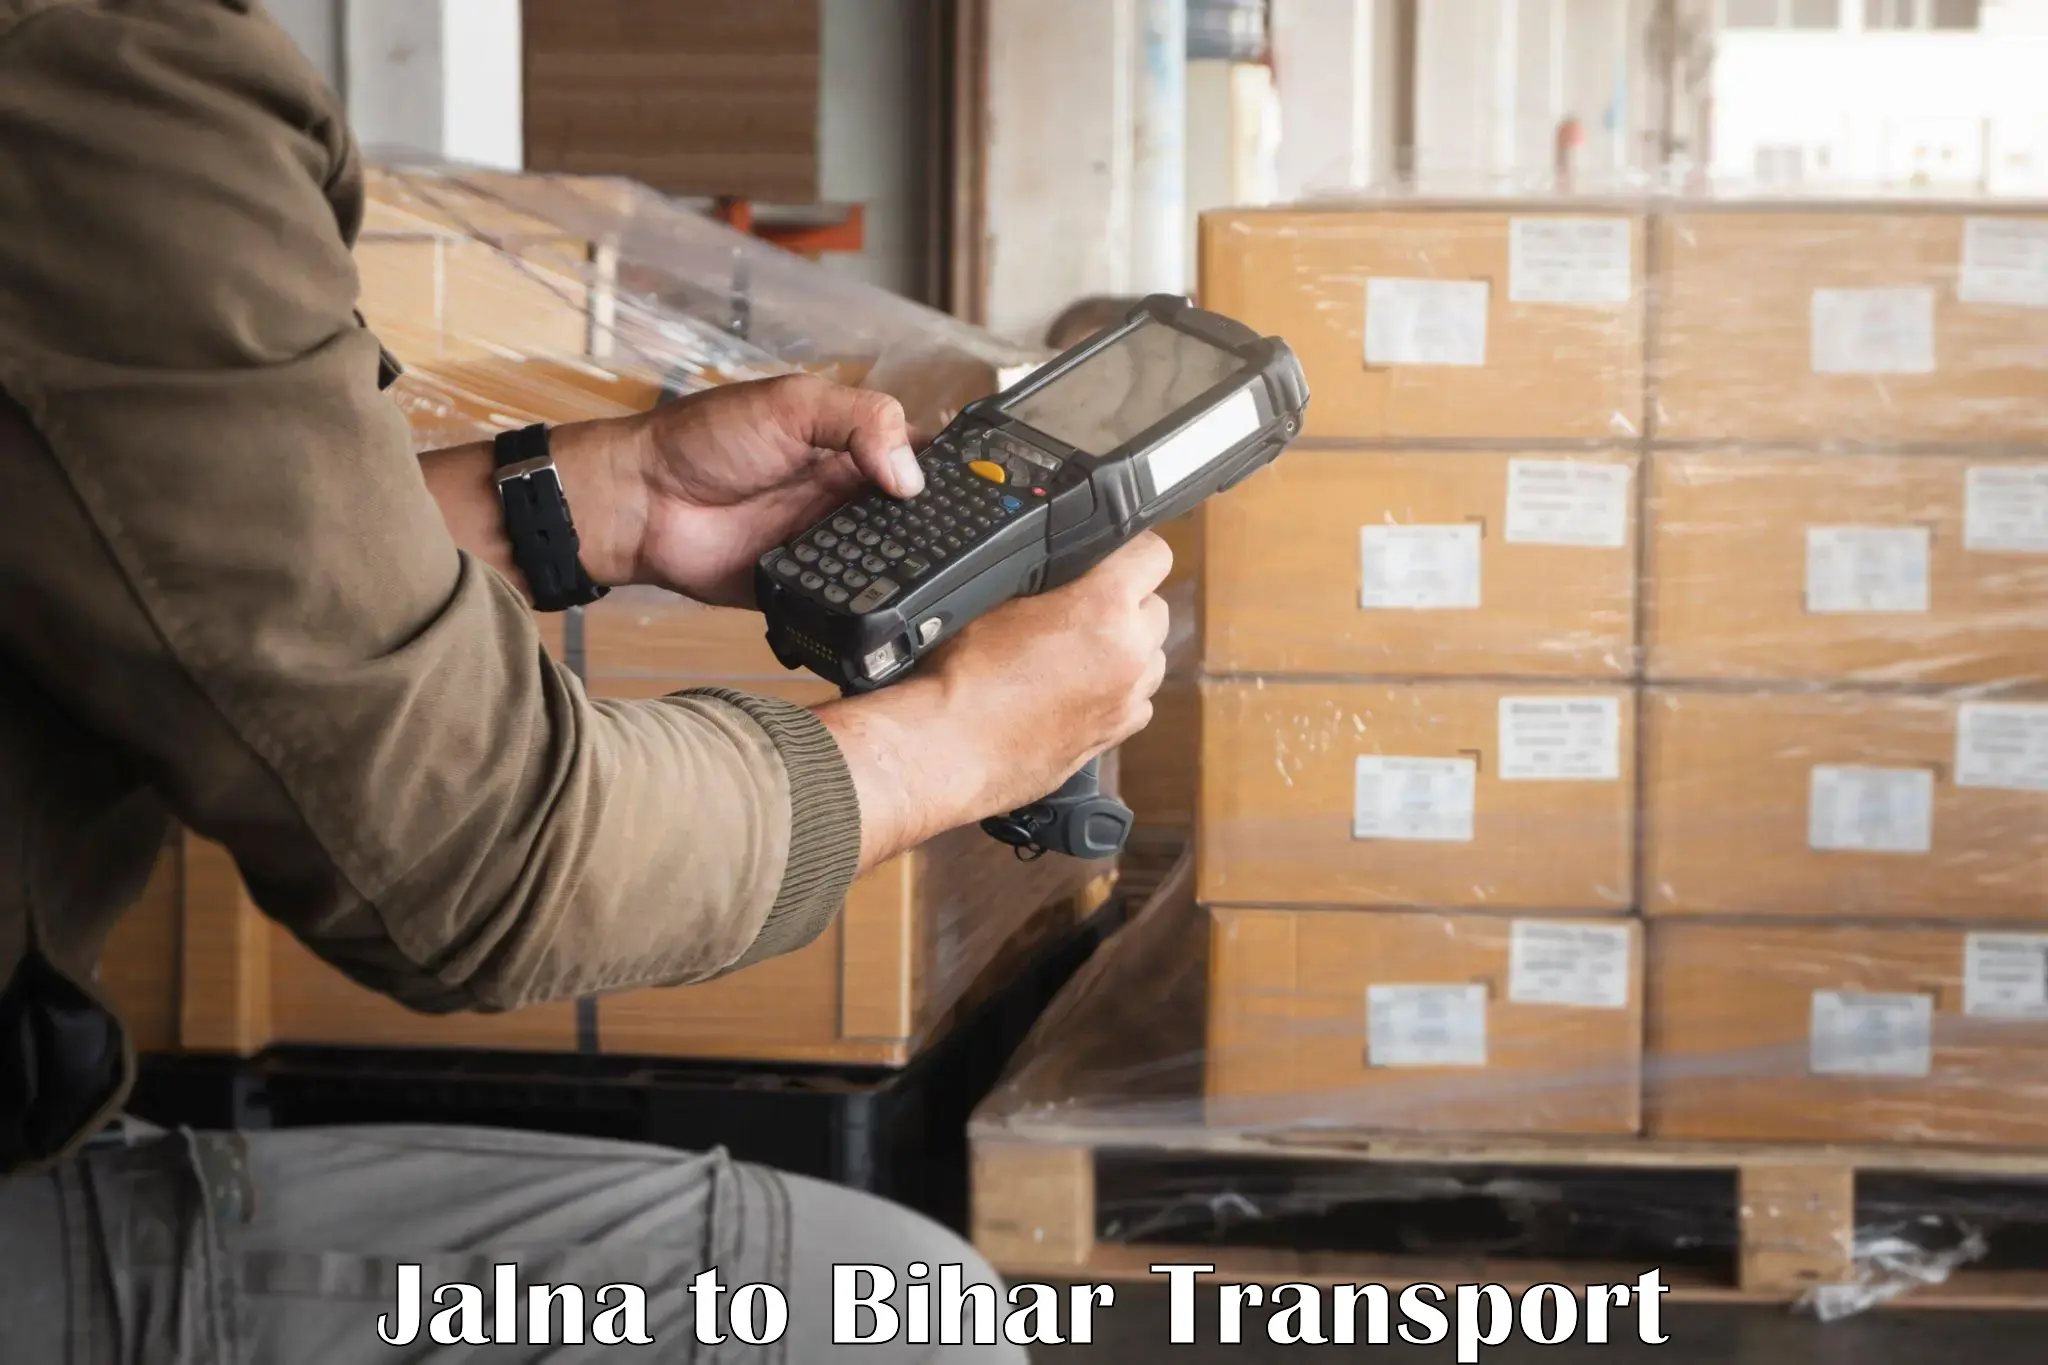 Delivery service Jalna to Rajpur